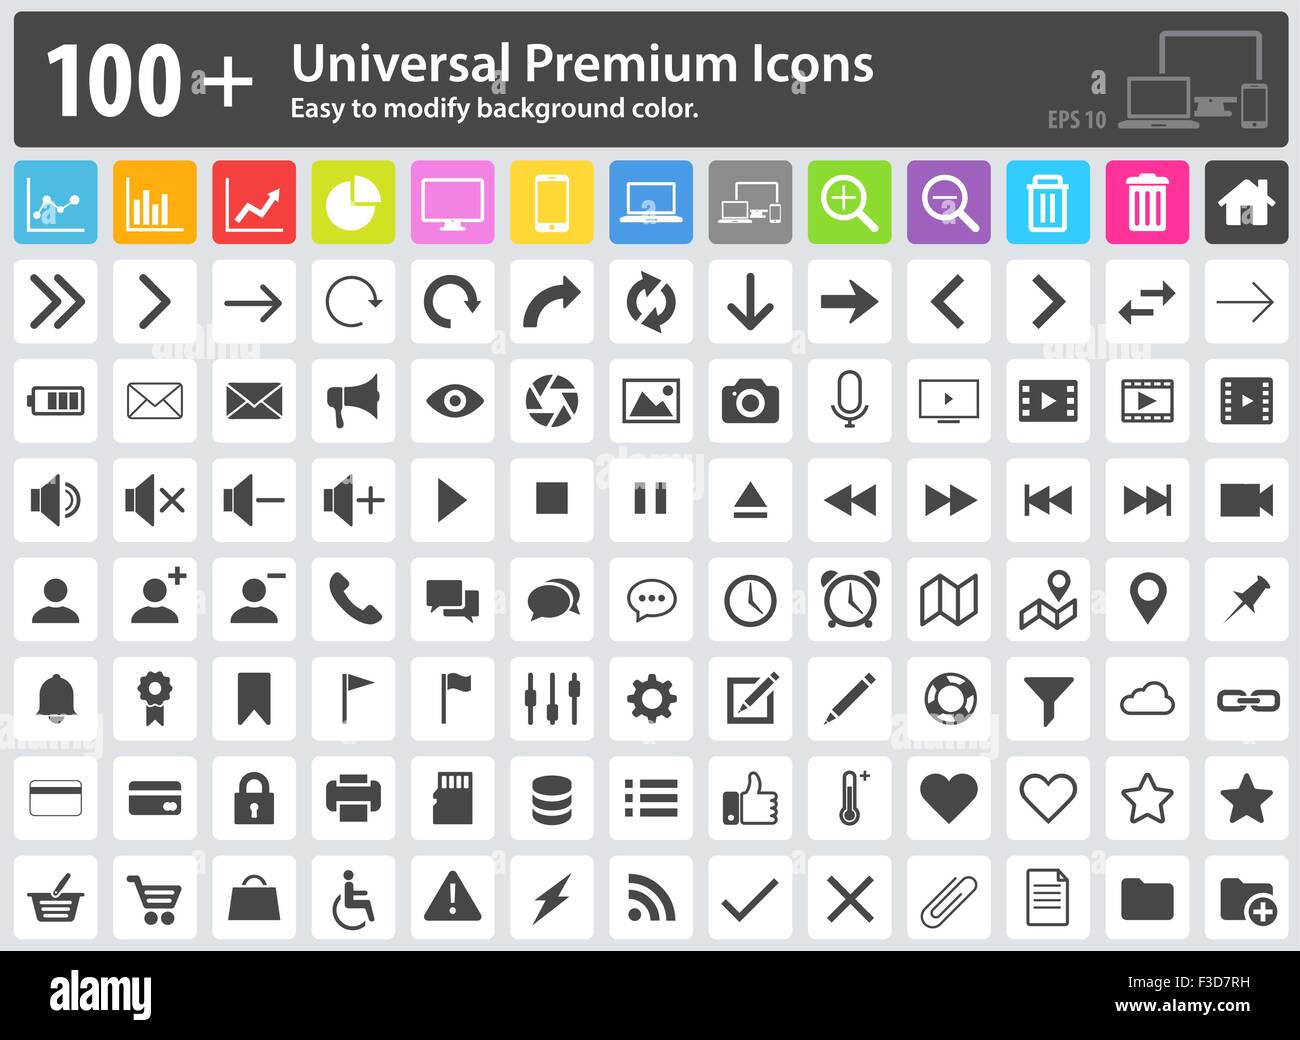 Set of 100+ Universal Premium Icons. Easy to modify the background color. Media Icons, Web Icons, Arrow Icons, Settings Icon, Sh Stock Vector